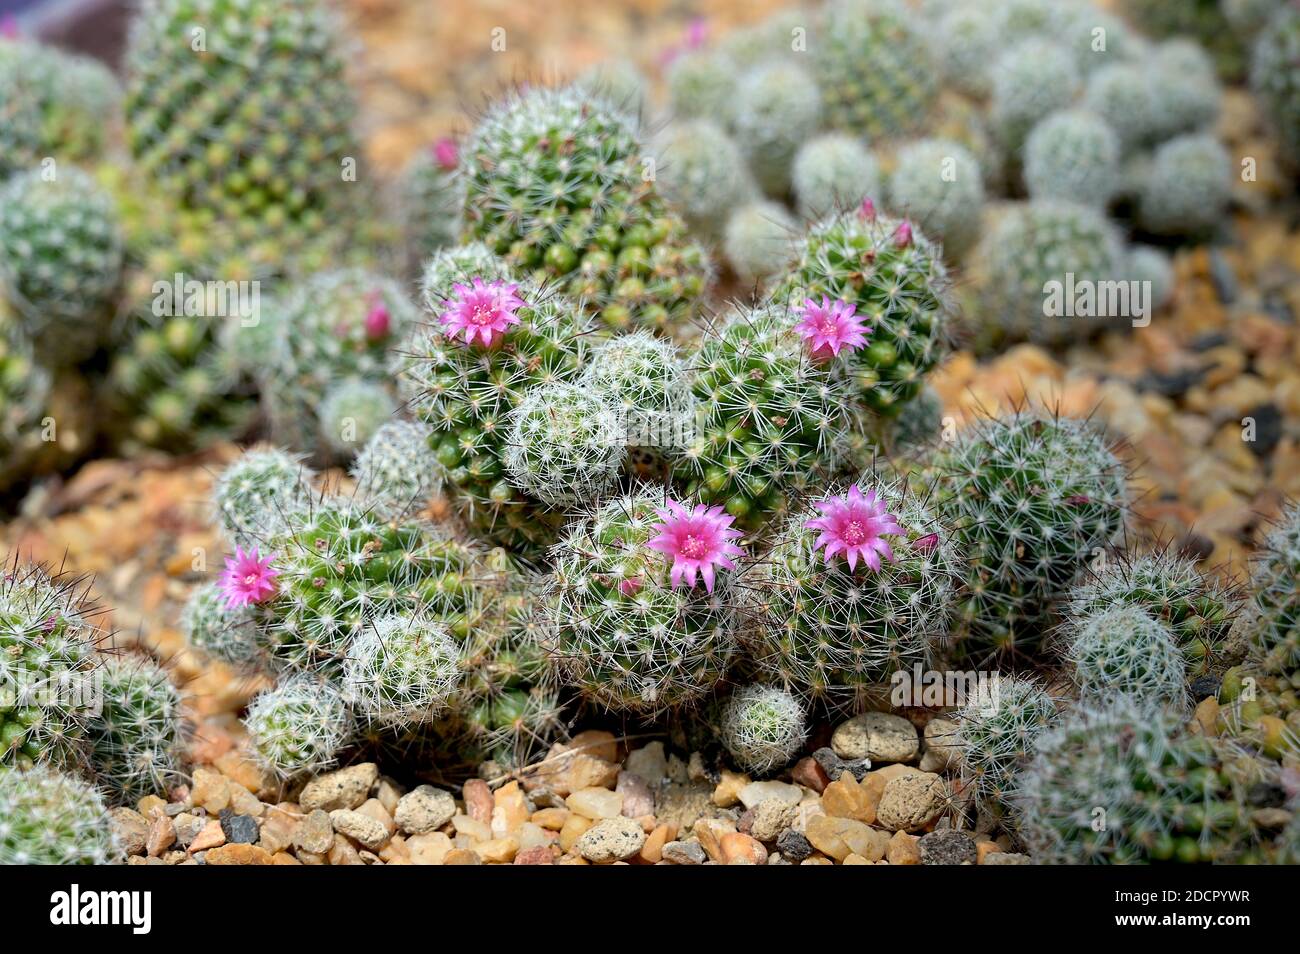 Close-up of pincushion cactus - Mammillaria, with pink flowers. A hardy perennial, it bears funnel-shaped flowers with a wide variety of colors. Stock Photo